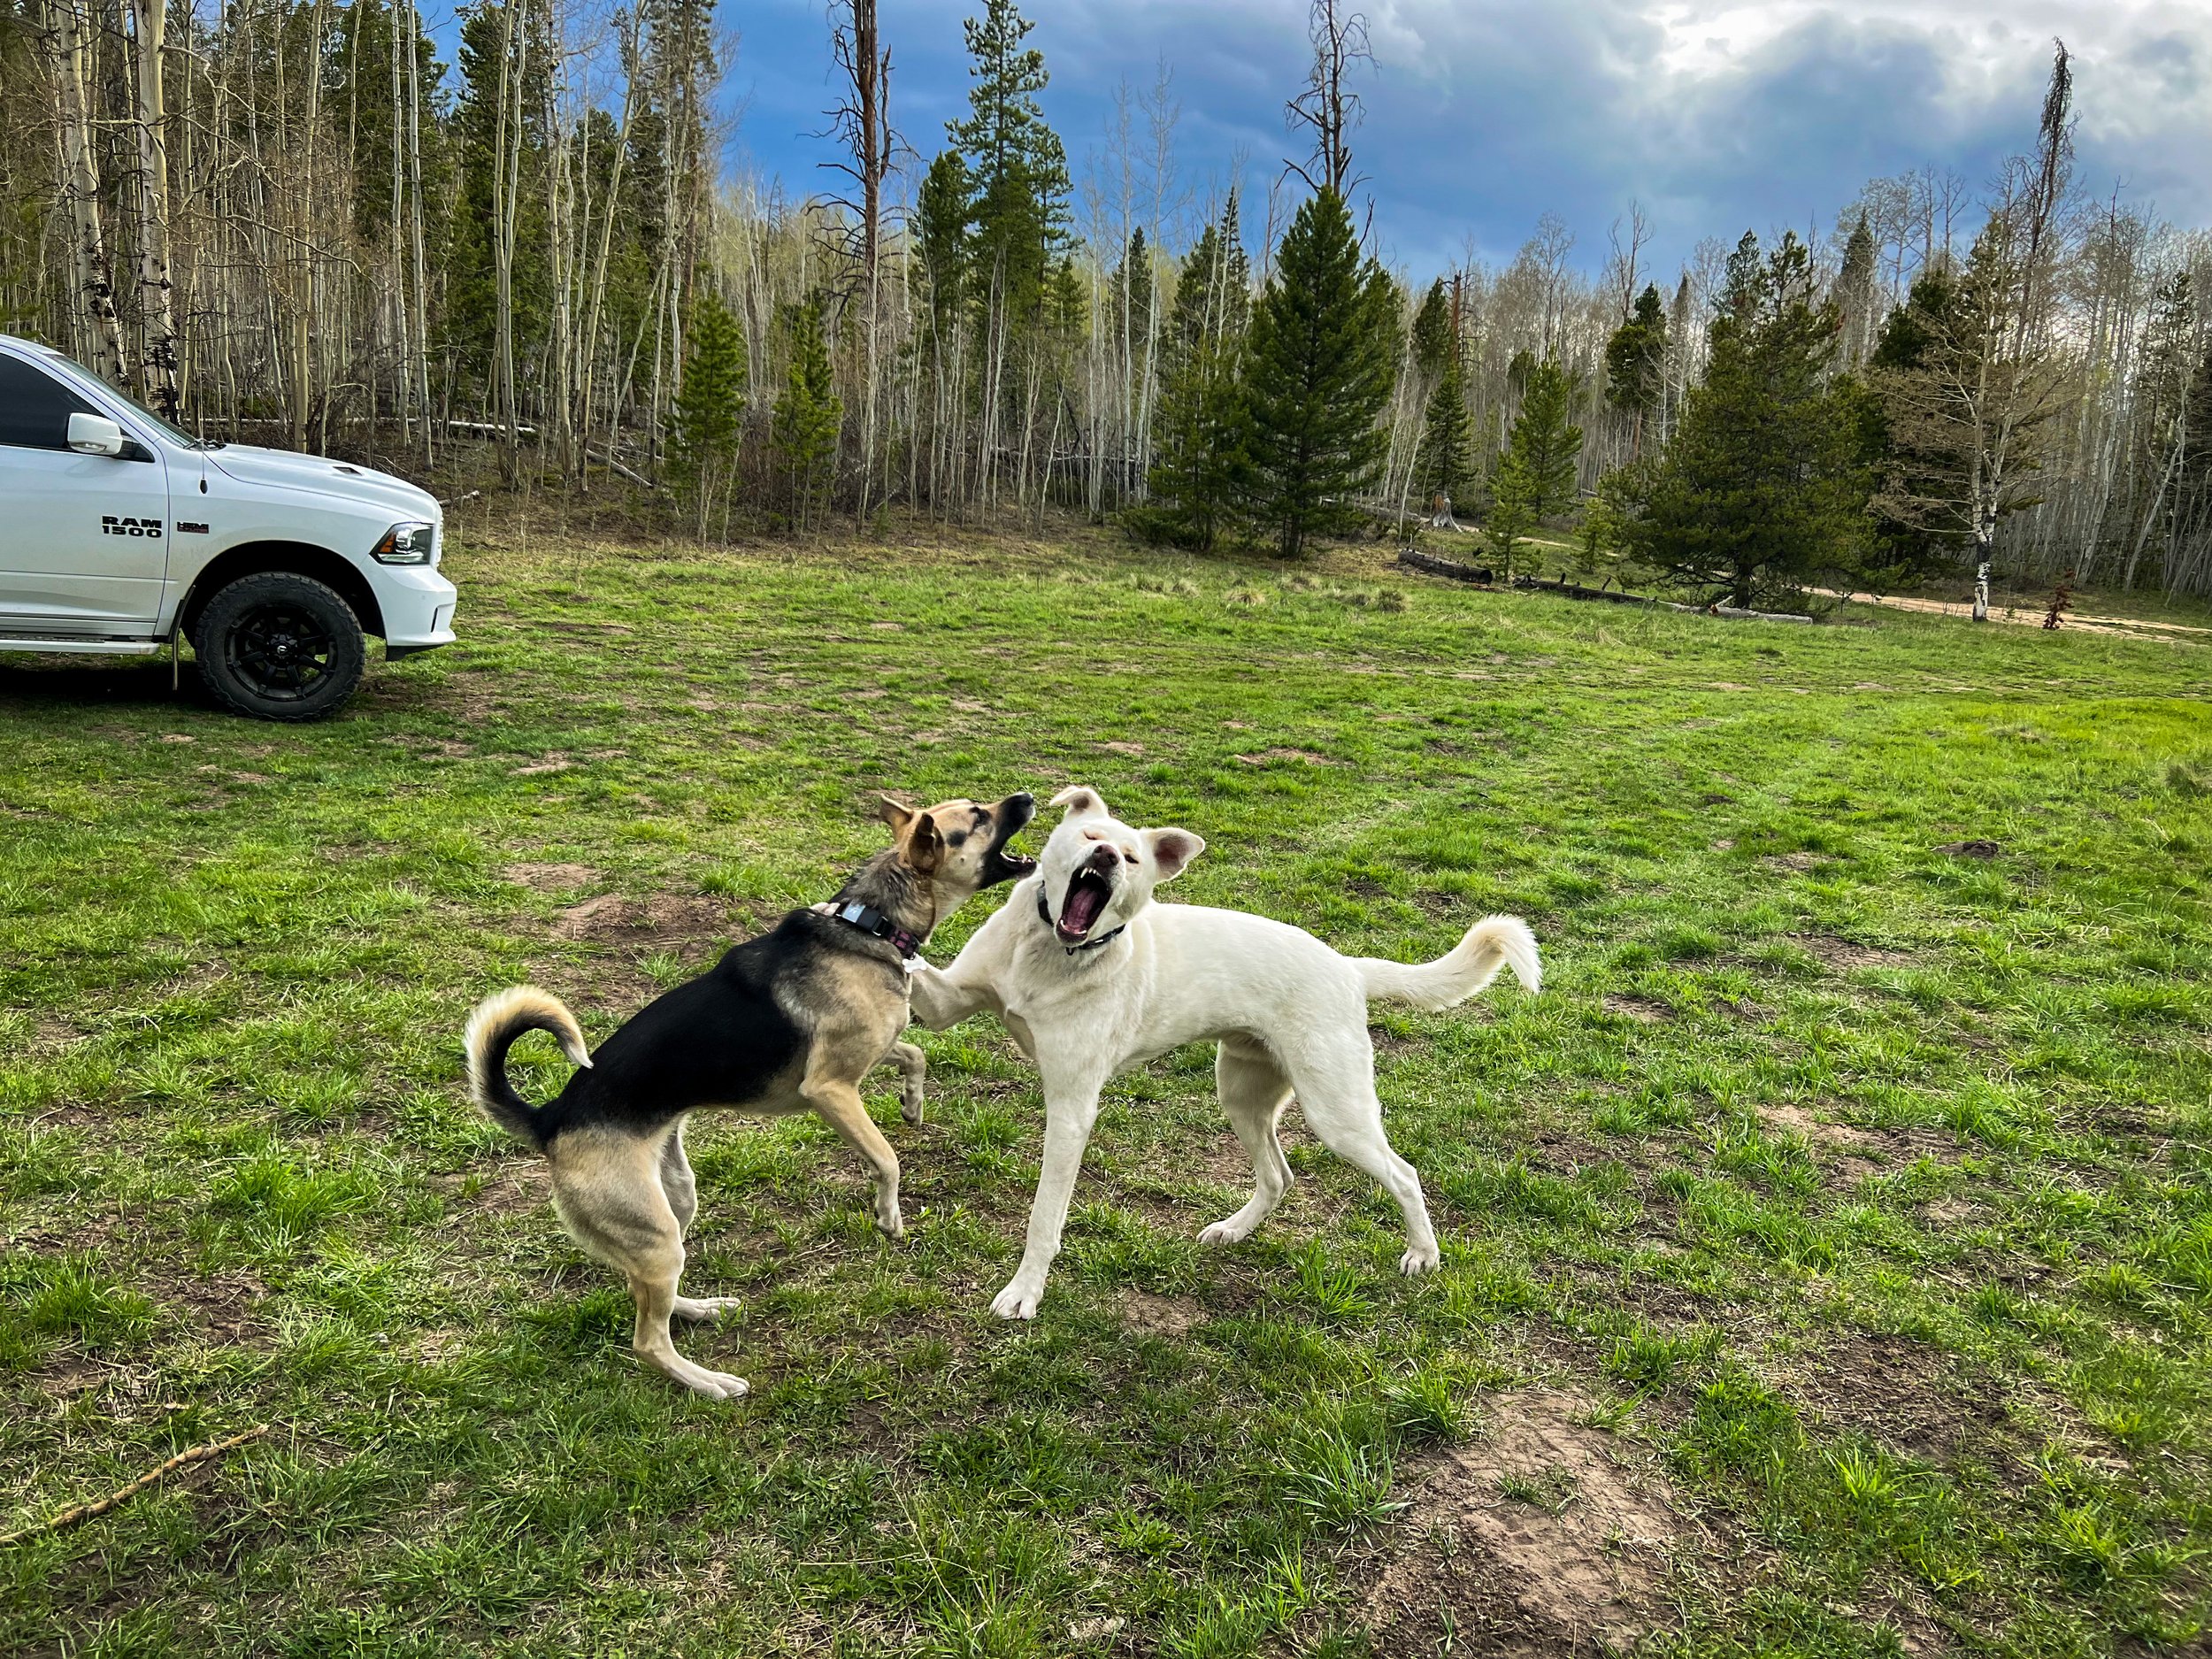  Pickles and Waffles sprinting around our dispersed camping area in Rand, CO.  